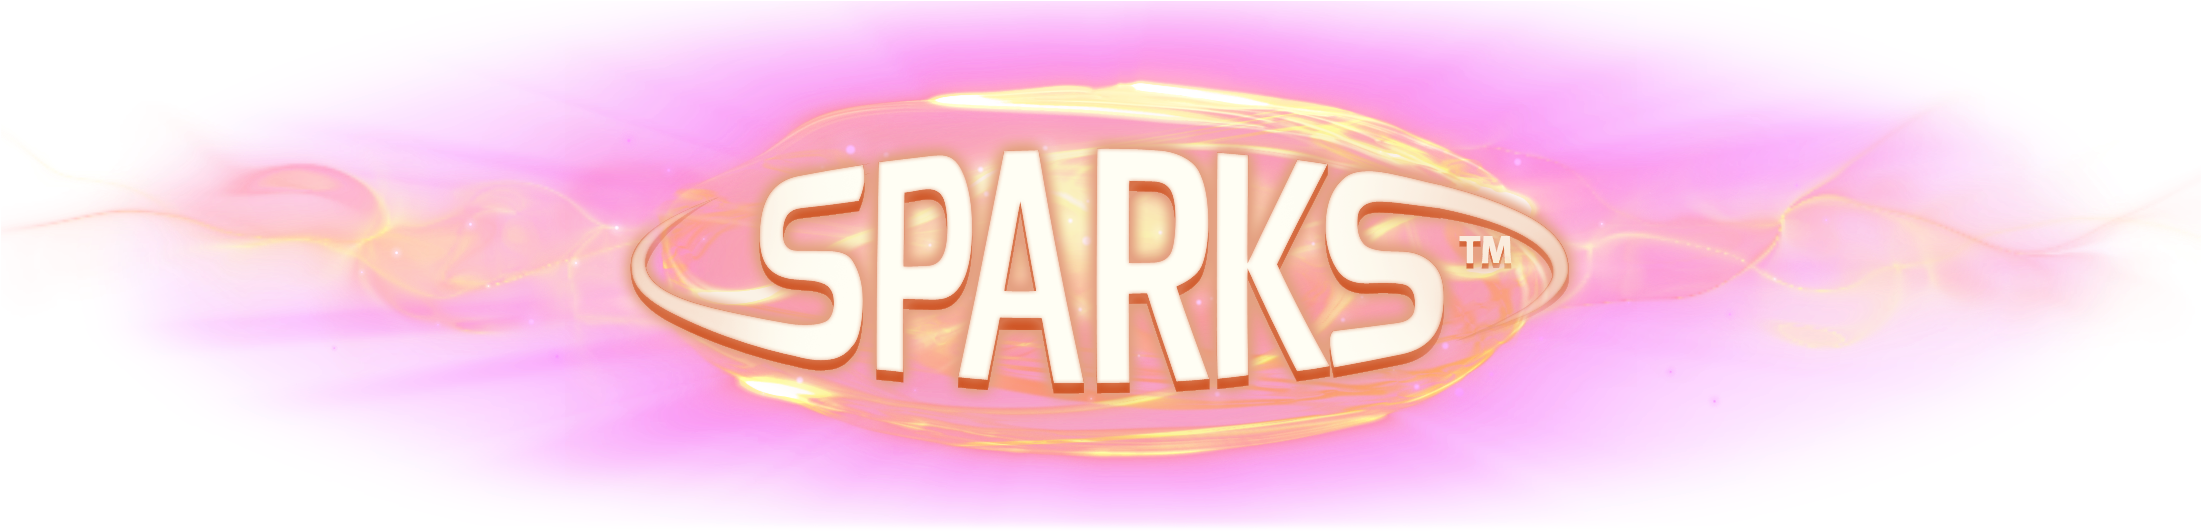 Spark Png 2201 X 531